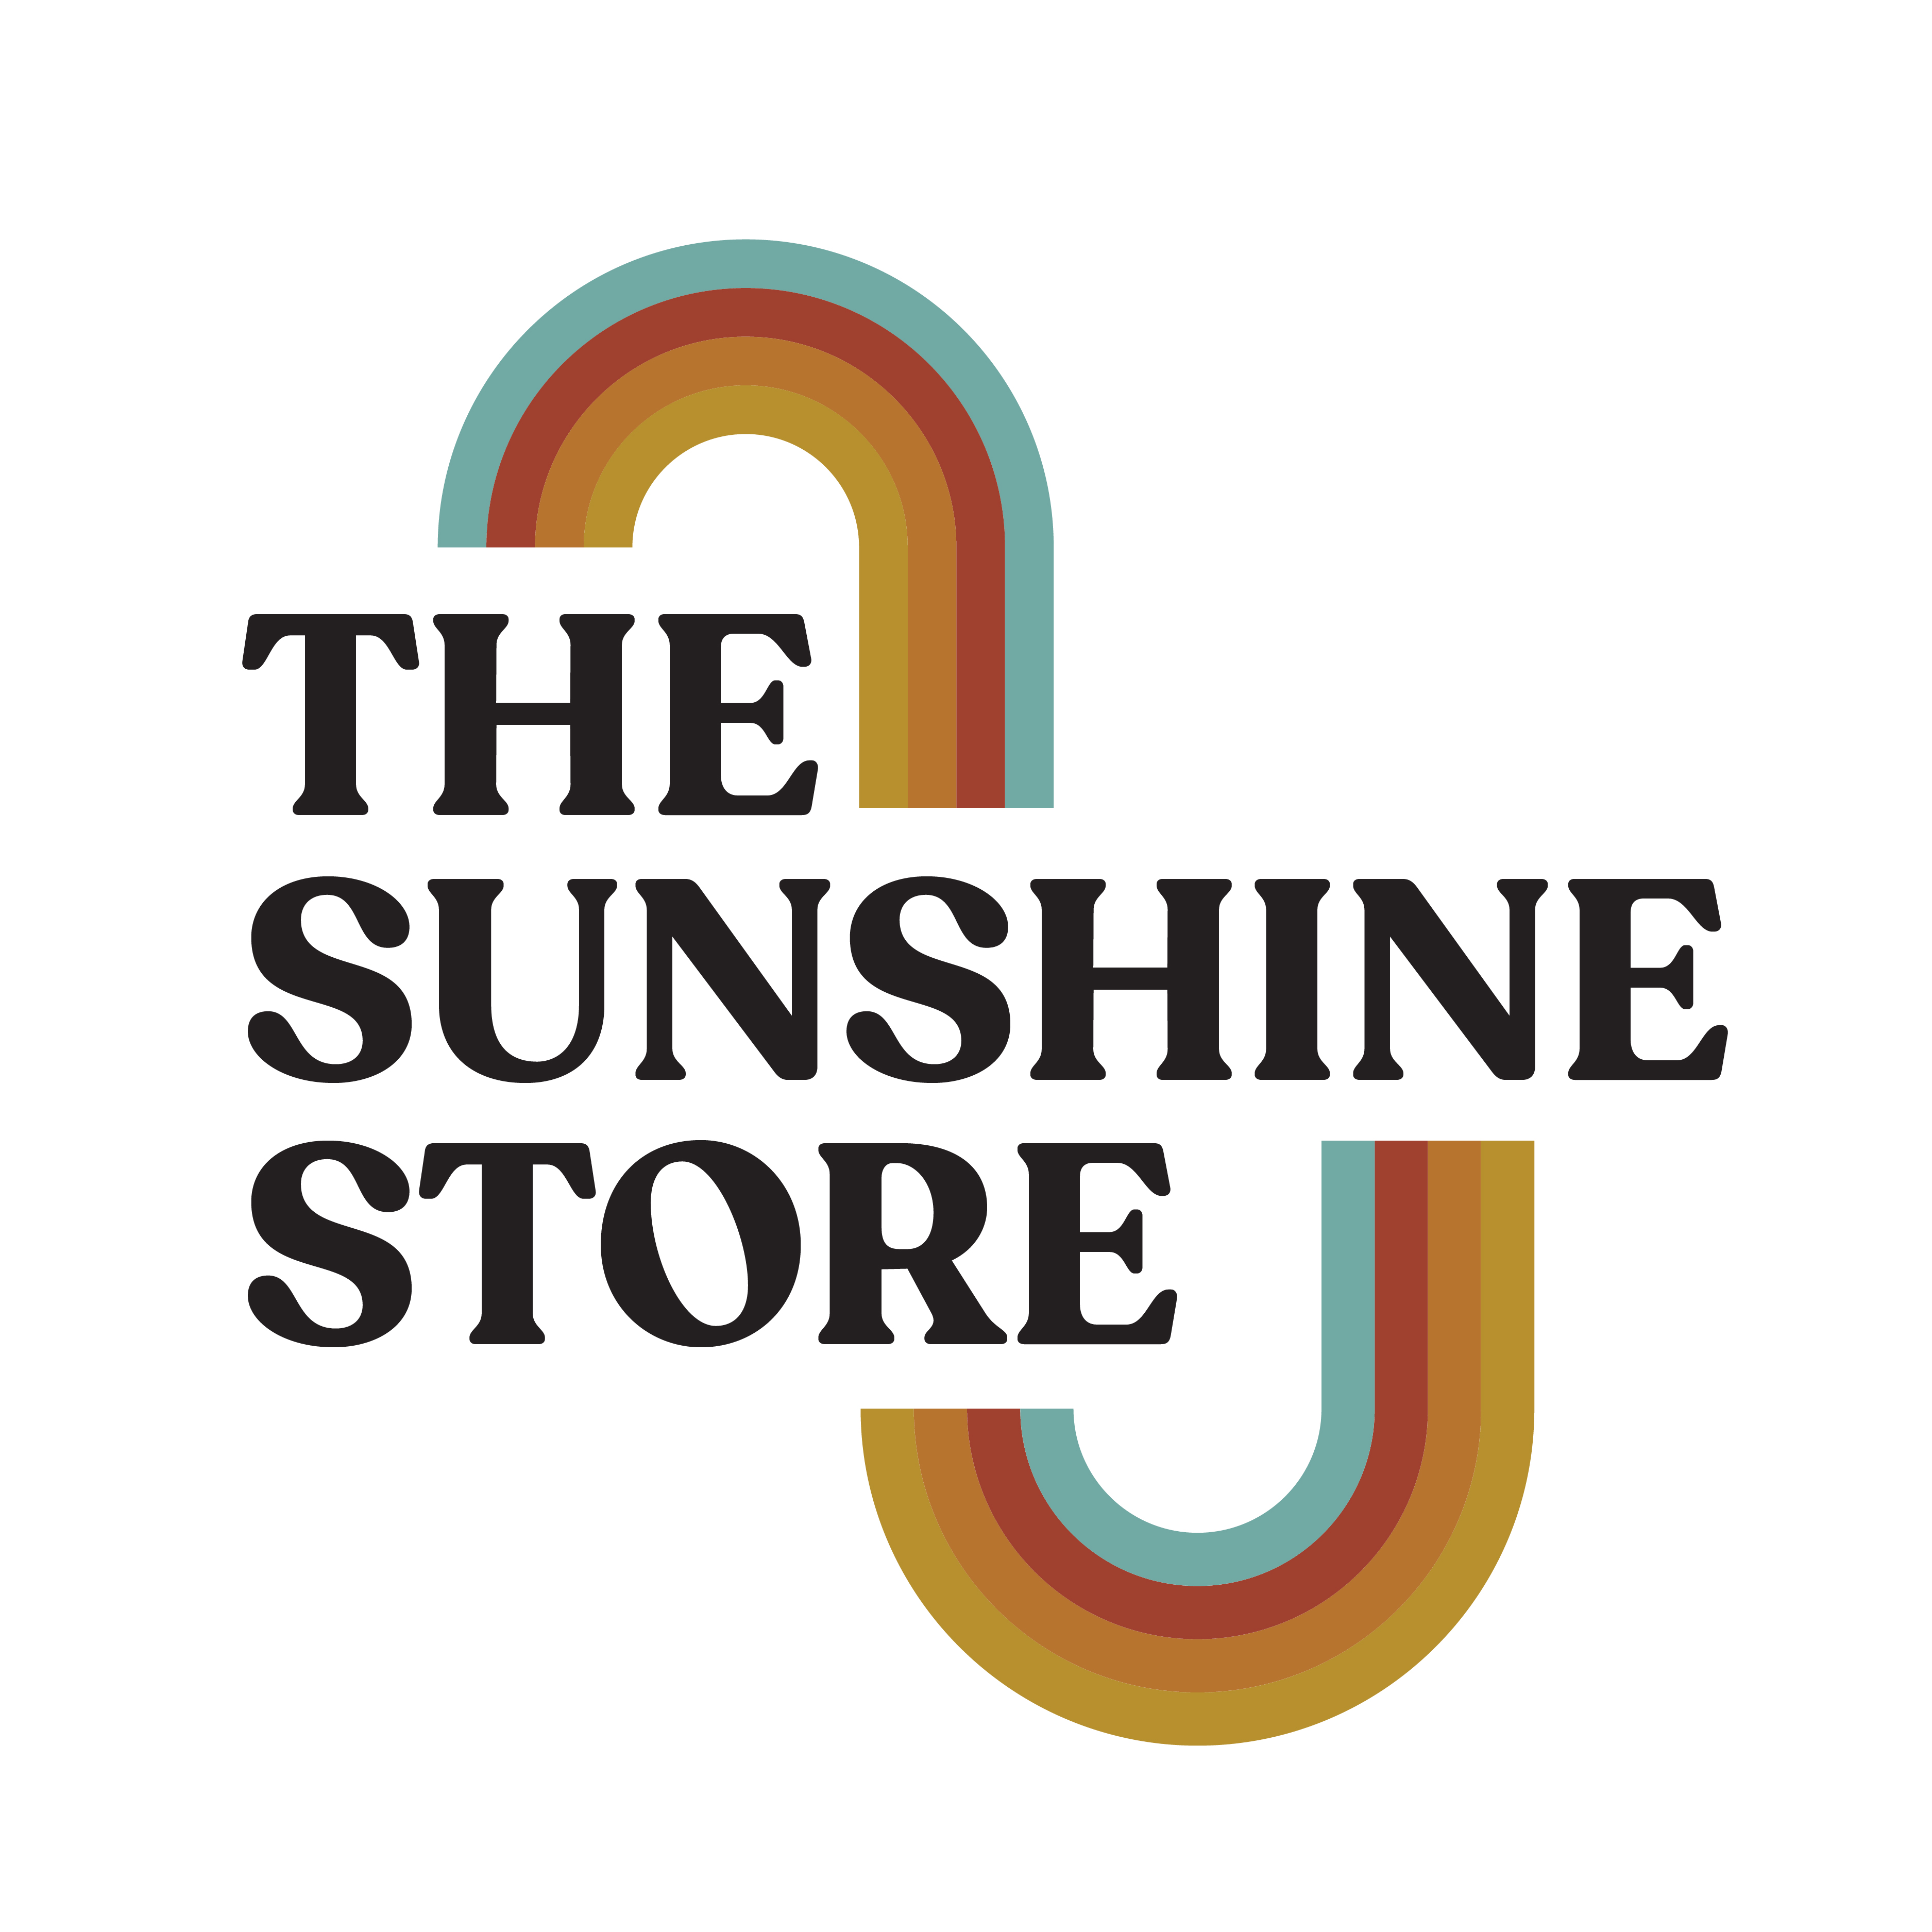 The Sunshine Store logo design by logo designer Stellen Design for your inspiration and for the worlds largest logo competition